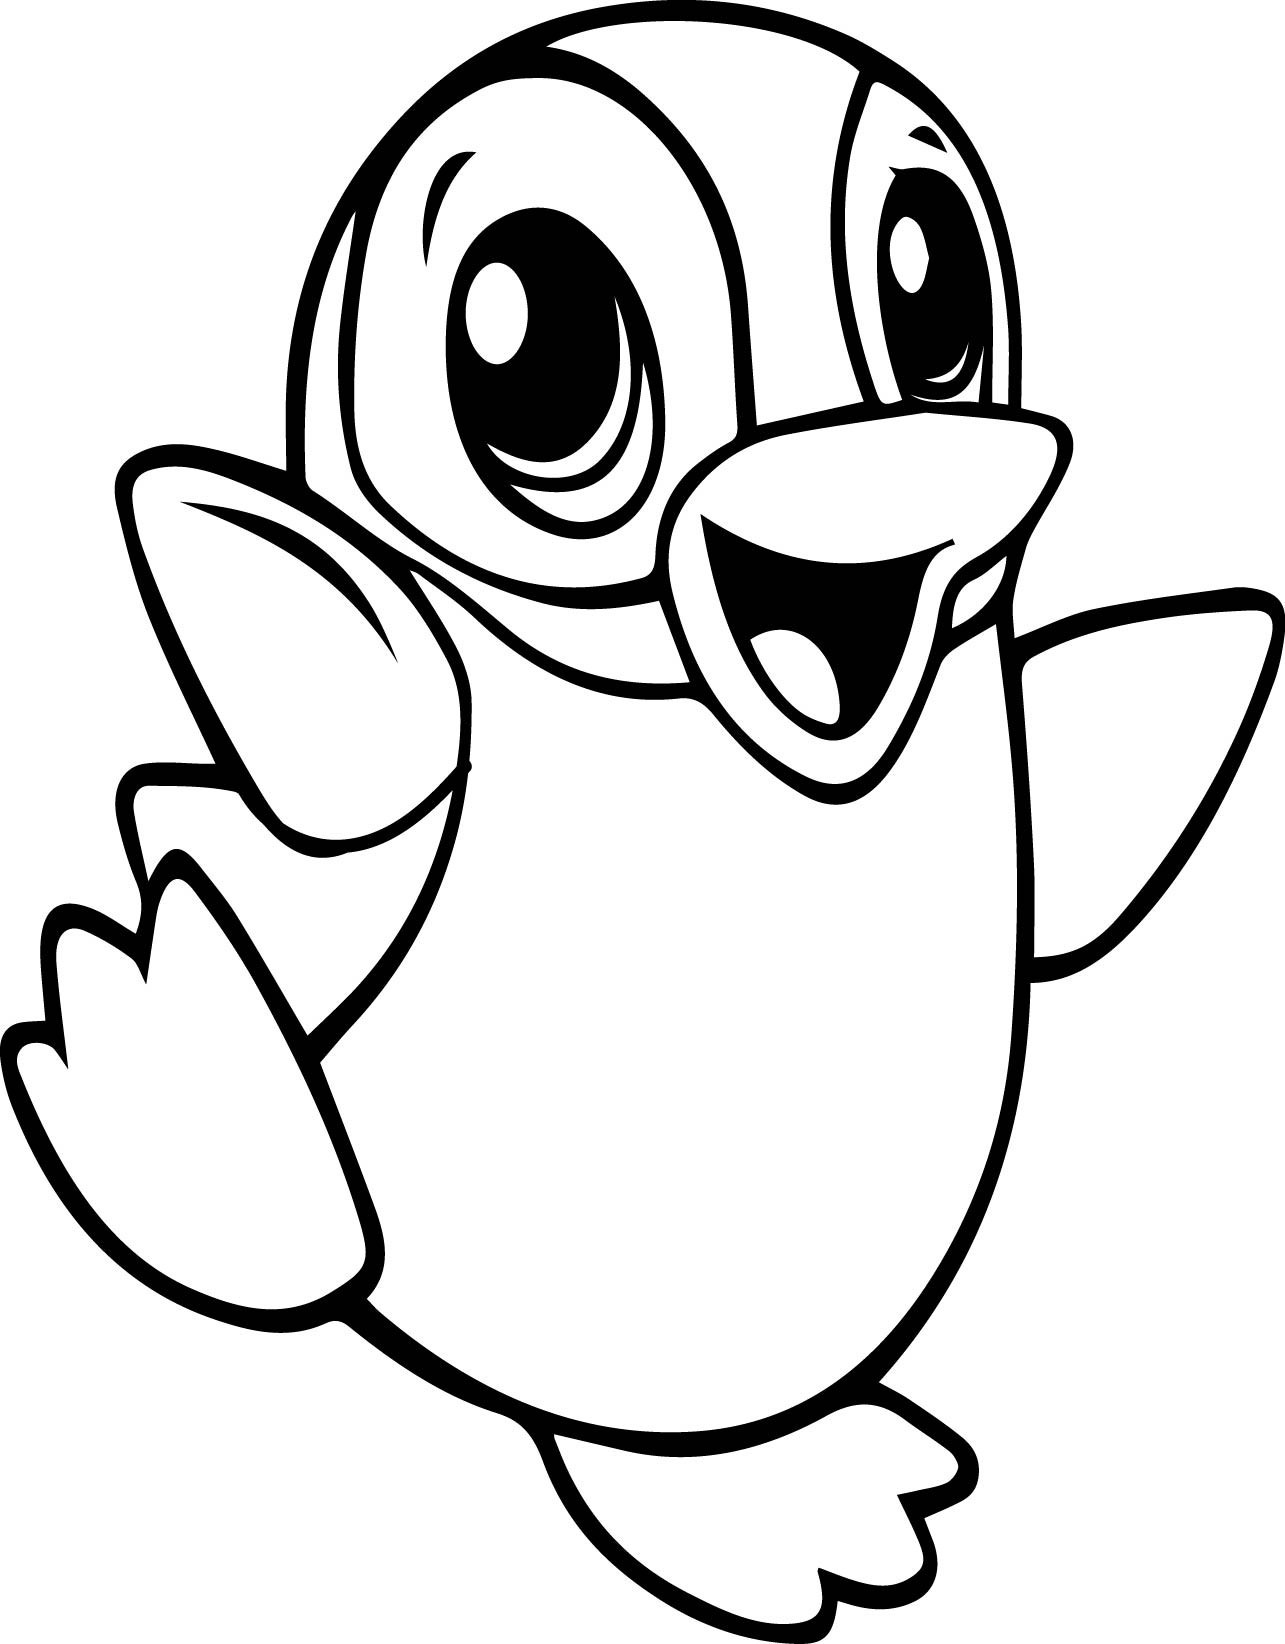 Cute Baby Animal Coloring Pages
 Cute Animal Coloring Pages Best Coloring Pages For Kids